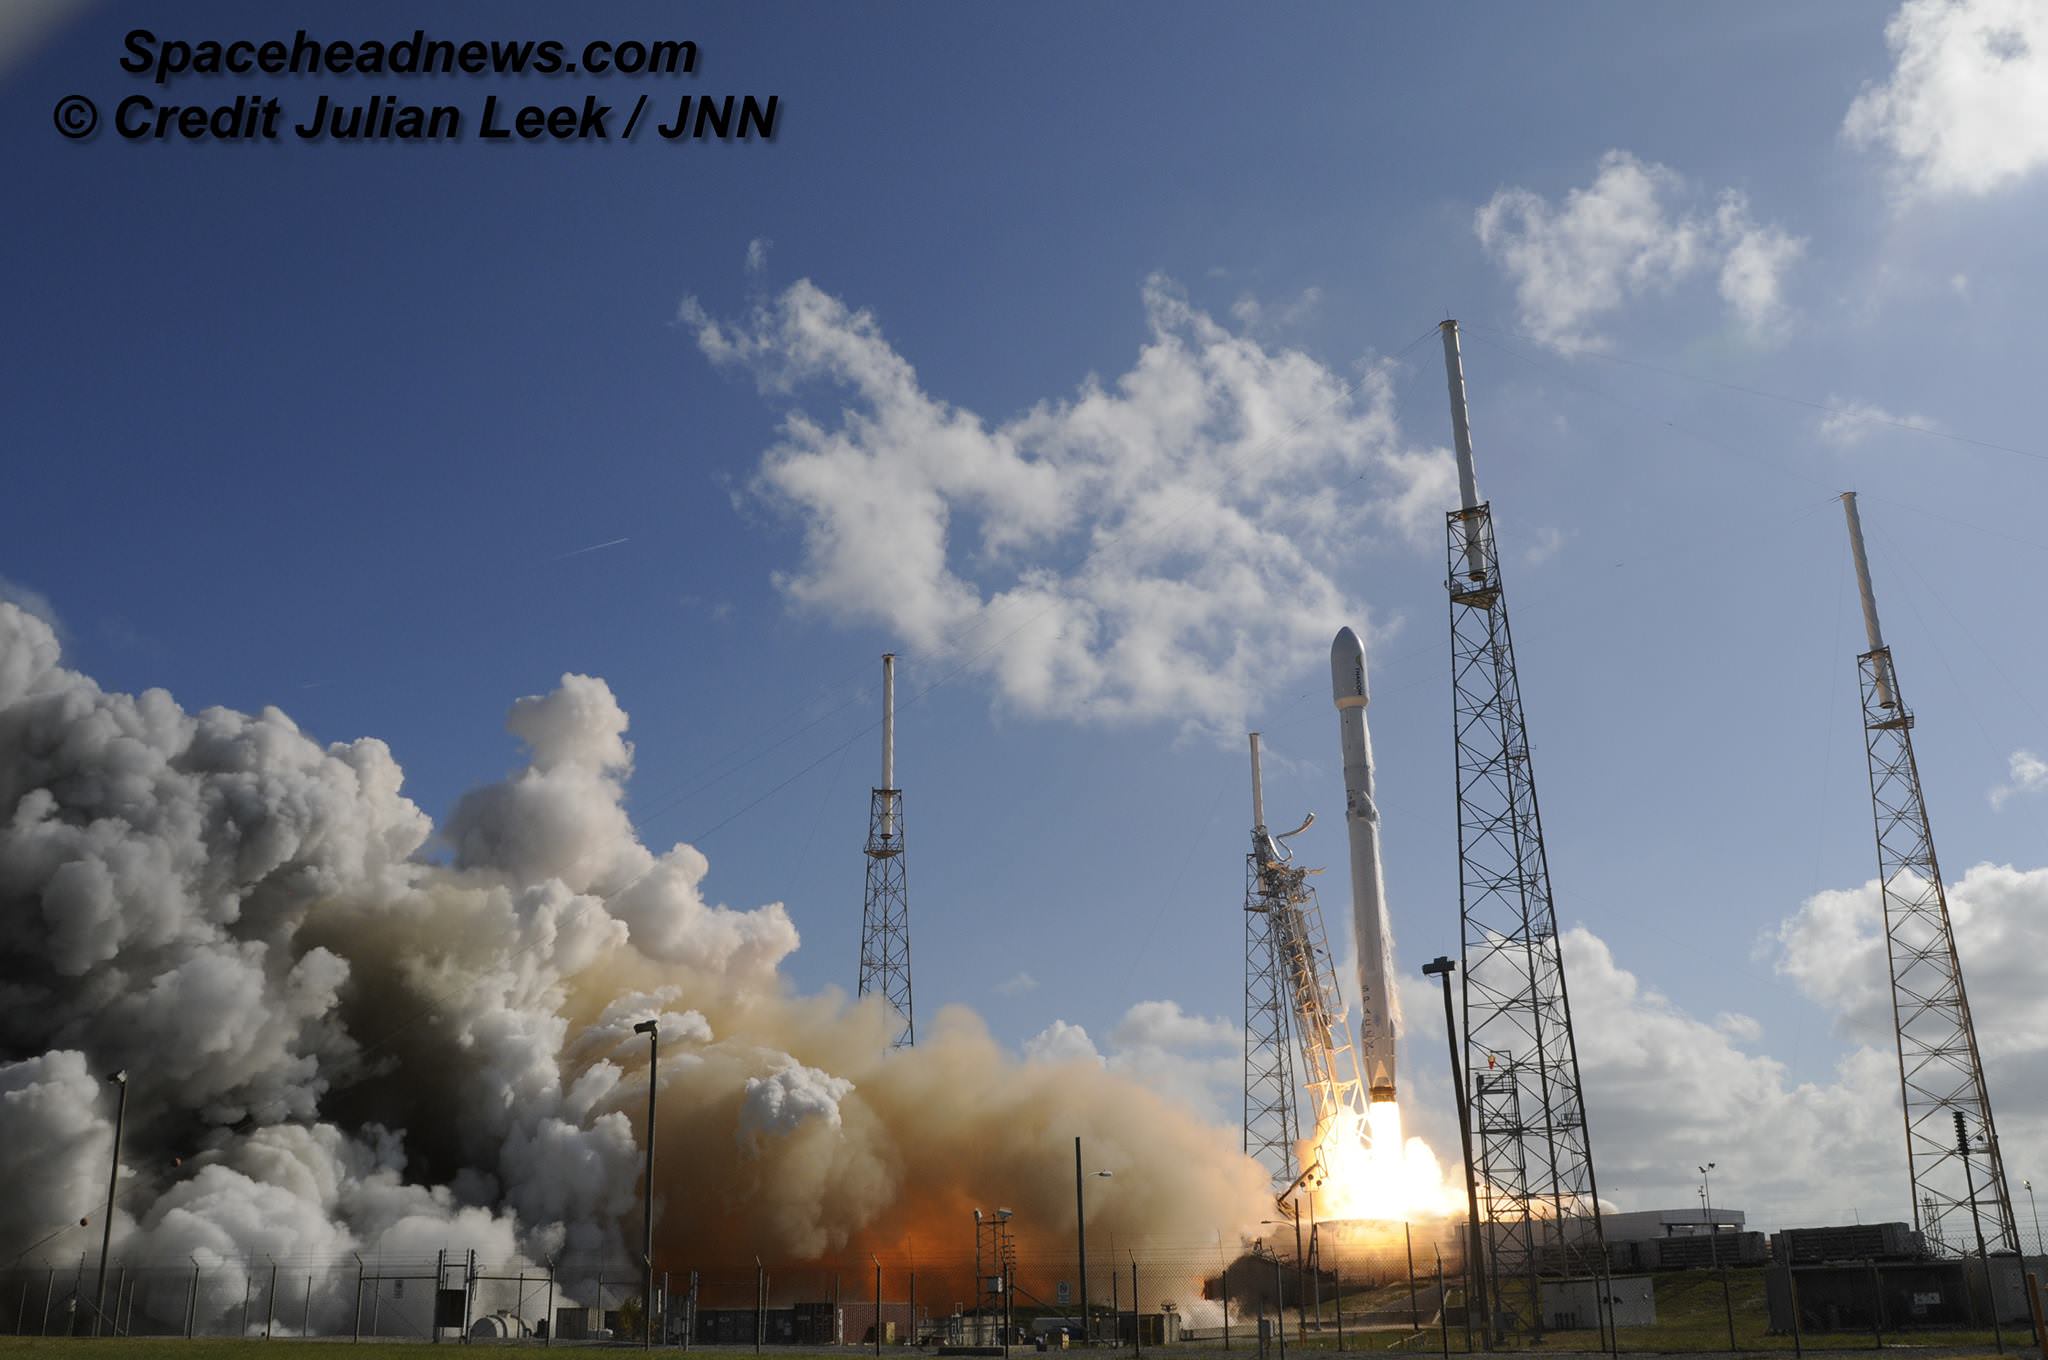 Launch of SpaceX Falcon 9 carrying Thaicom-8 communications satellite to orbit on May 27, 2016 at 5:39 p.m. EDT from Space Launch Complex 40 at Cape Canaveral Air Force Station, Fl.  Credit: Julian Leek   